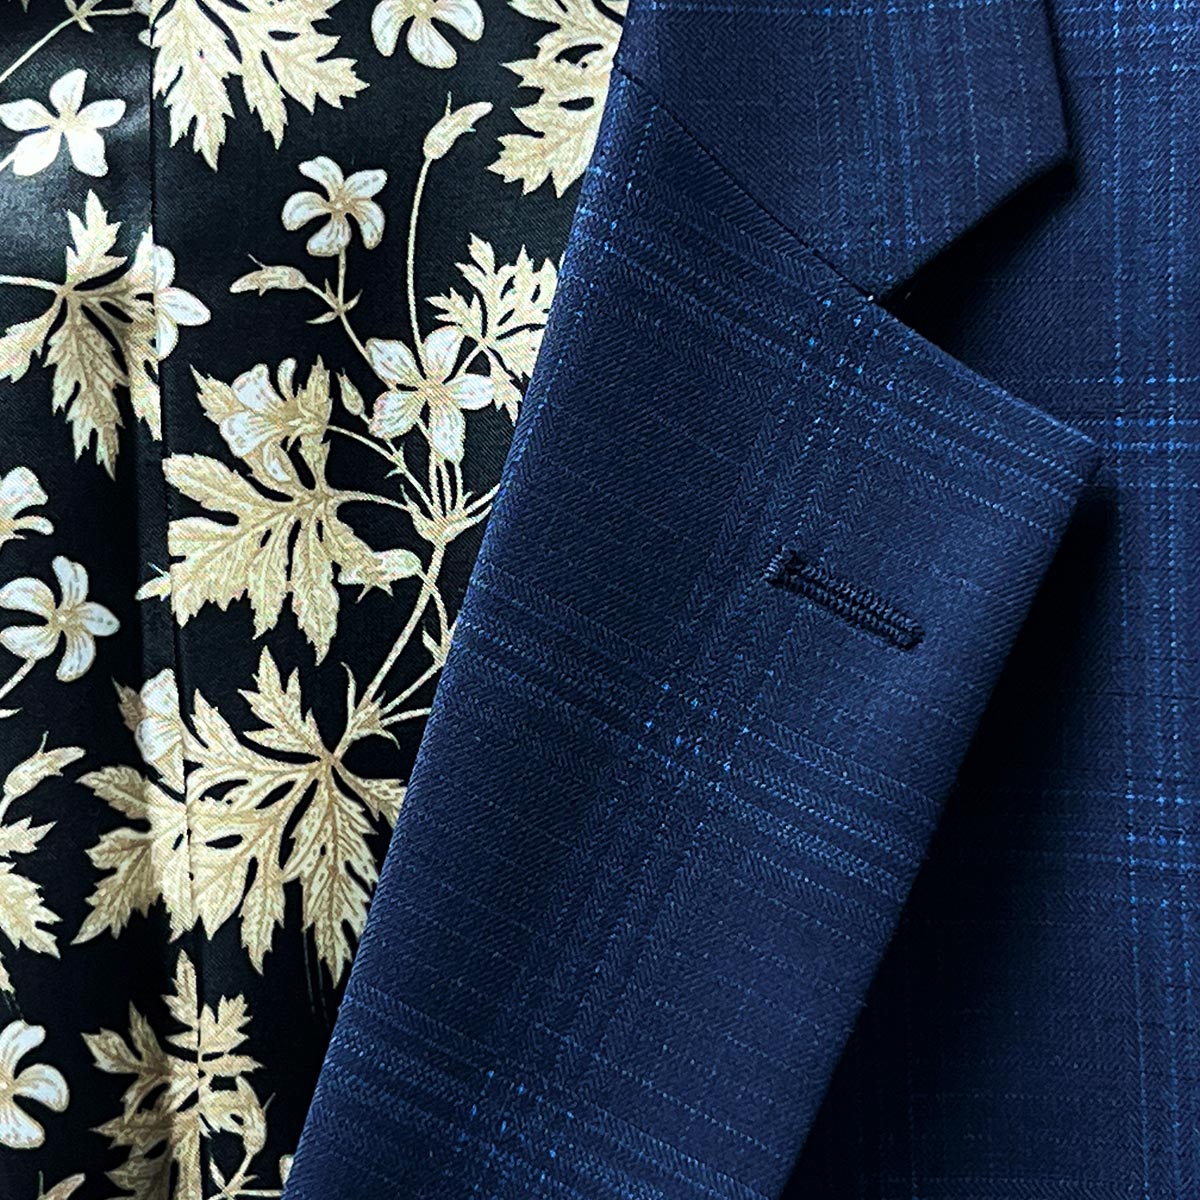  A lapel buttonhole indicating a readiness for a boutonnière on a midnight blue windowpane suit.